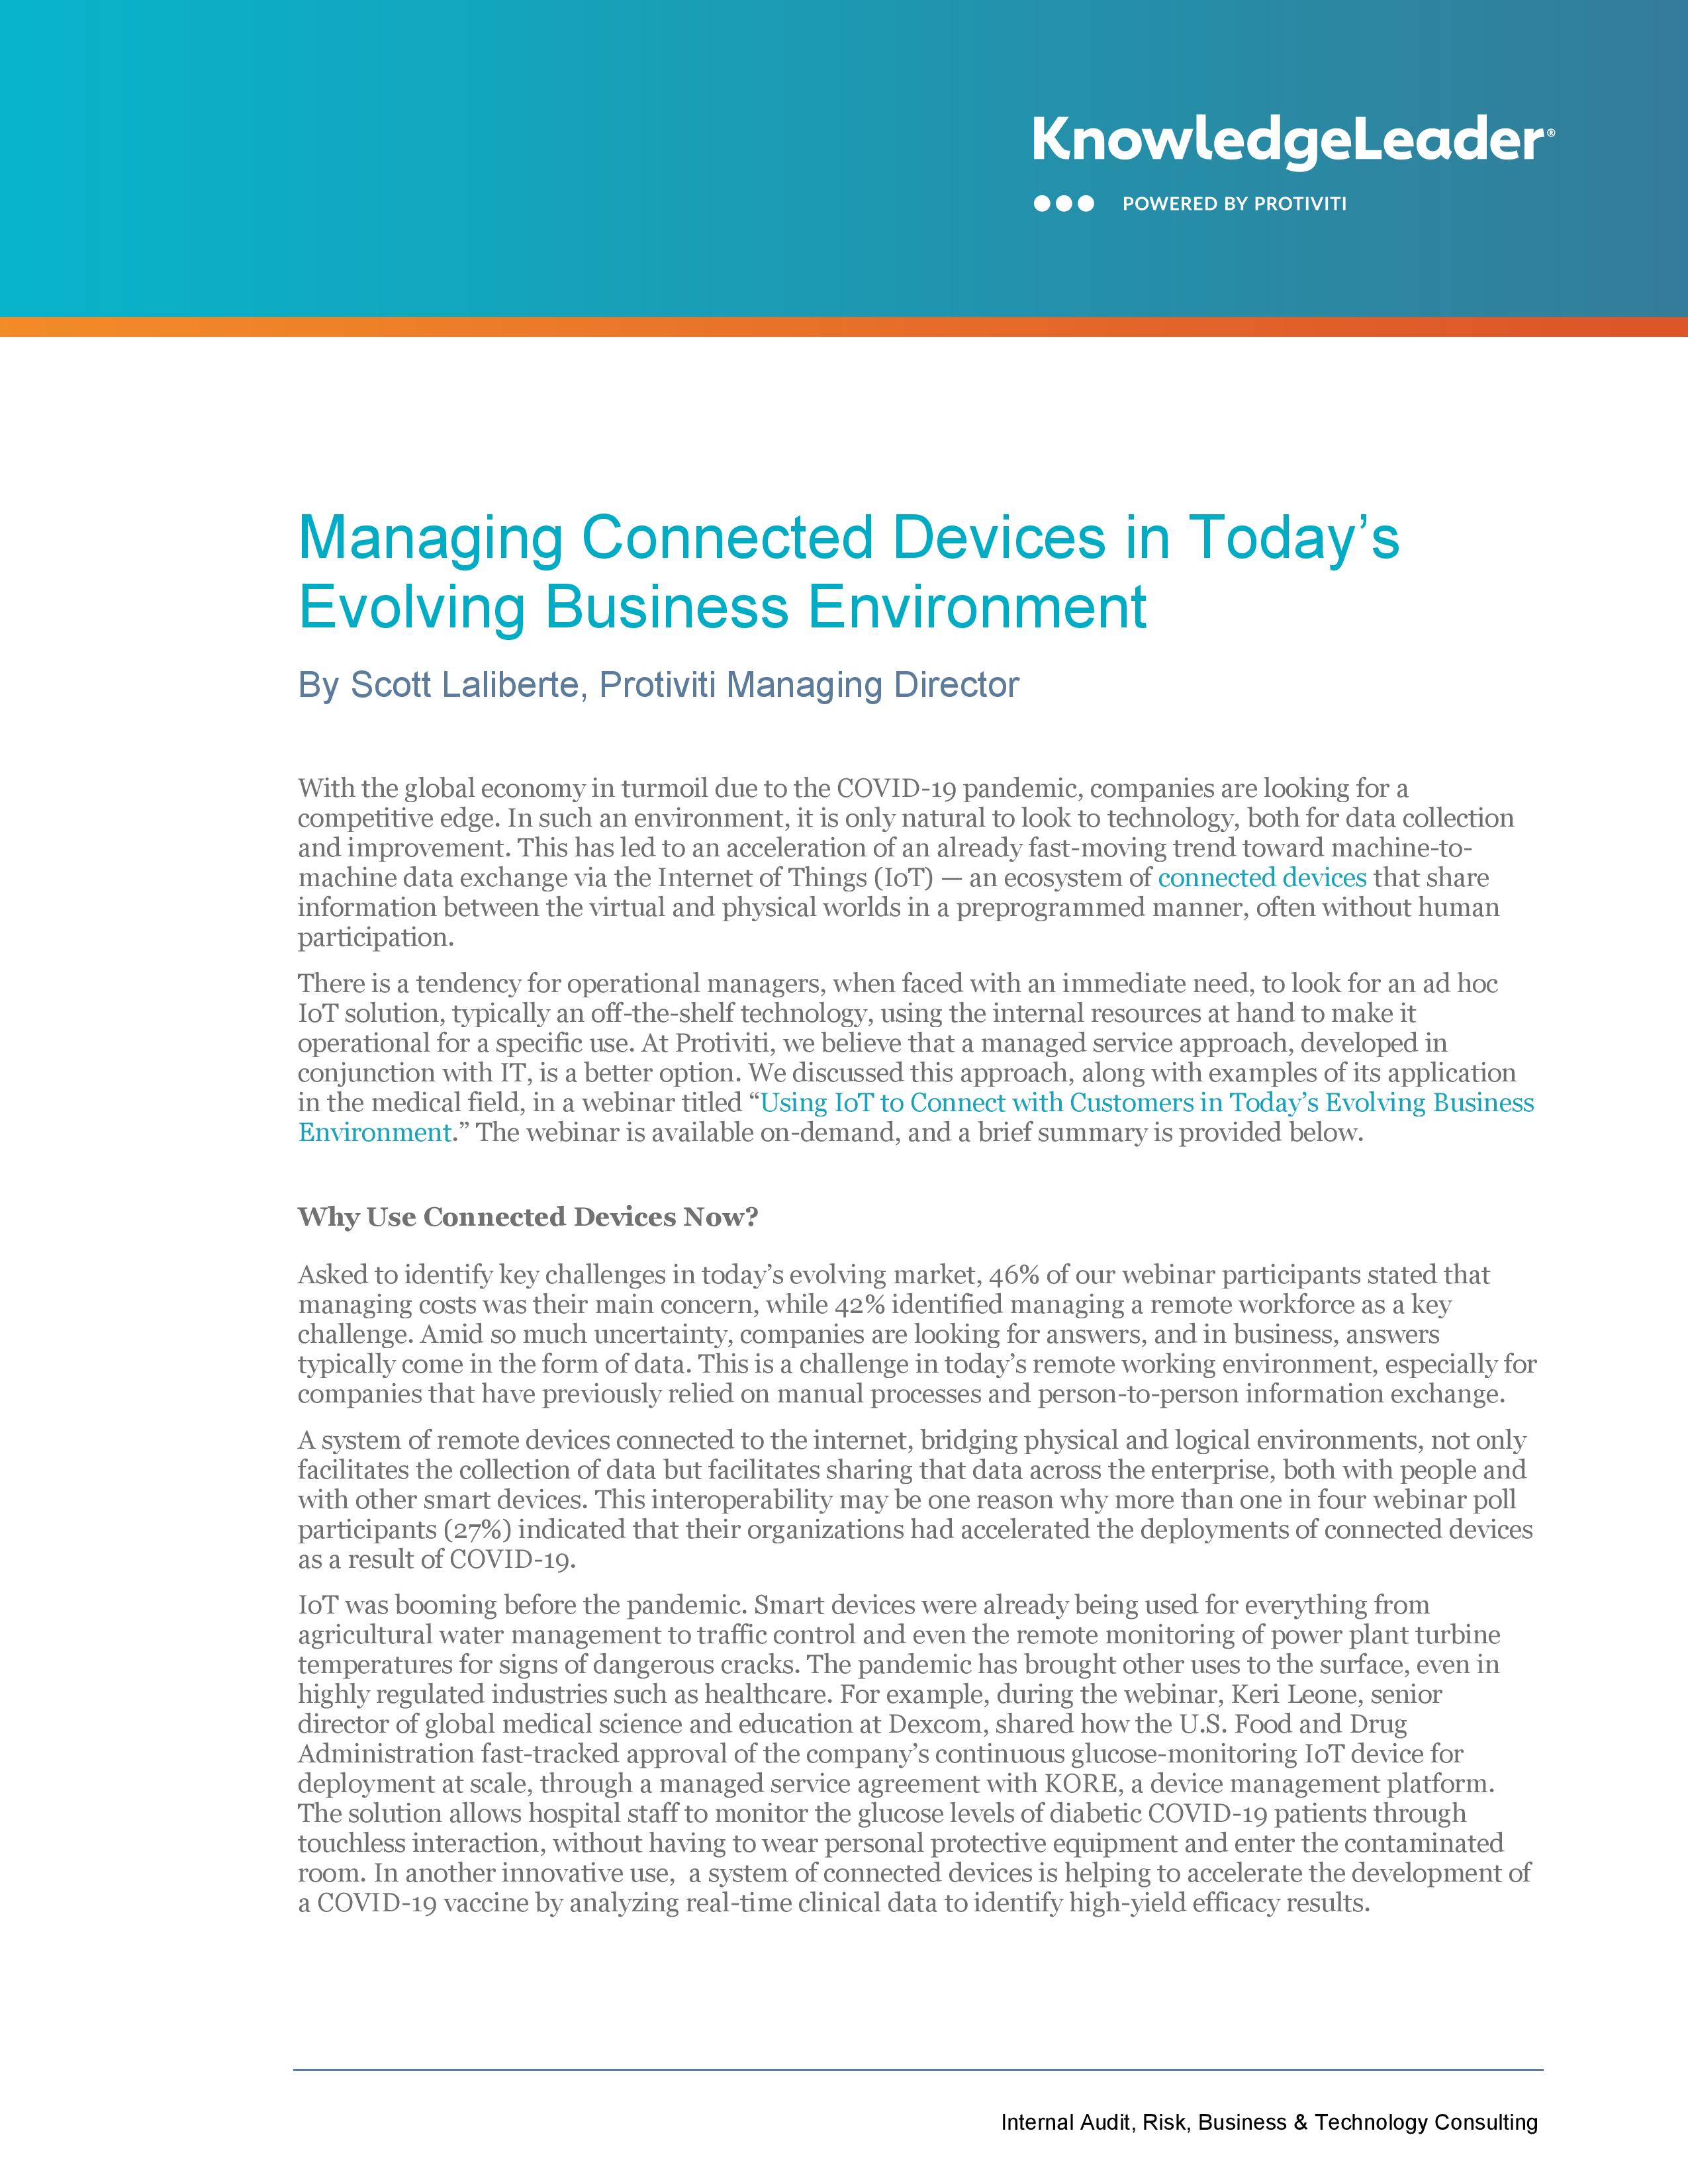 Screenshot of the first page of Managing Connected Devices in Today’s Evolving Business Environment